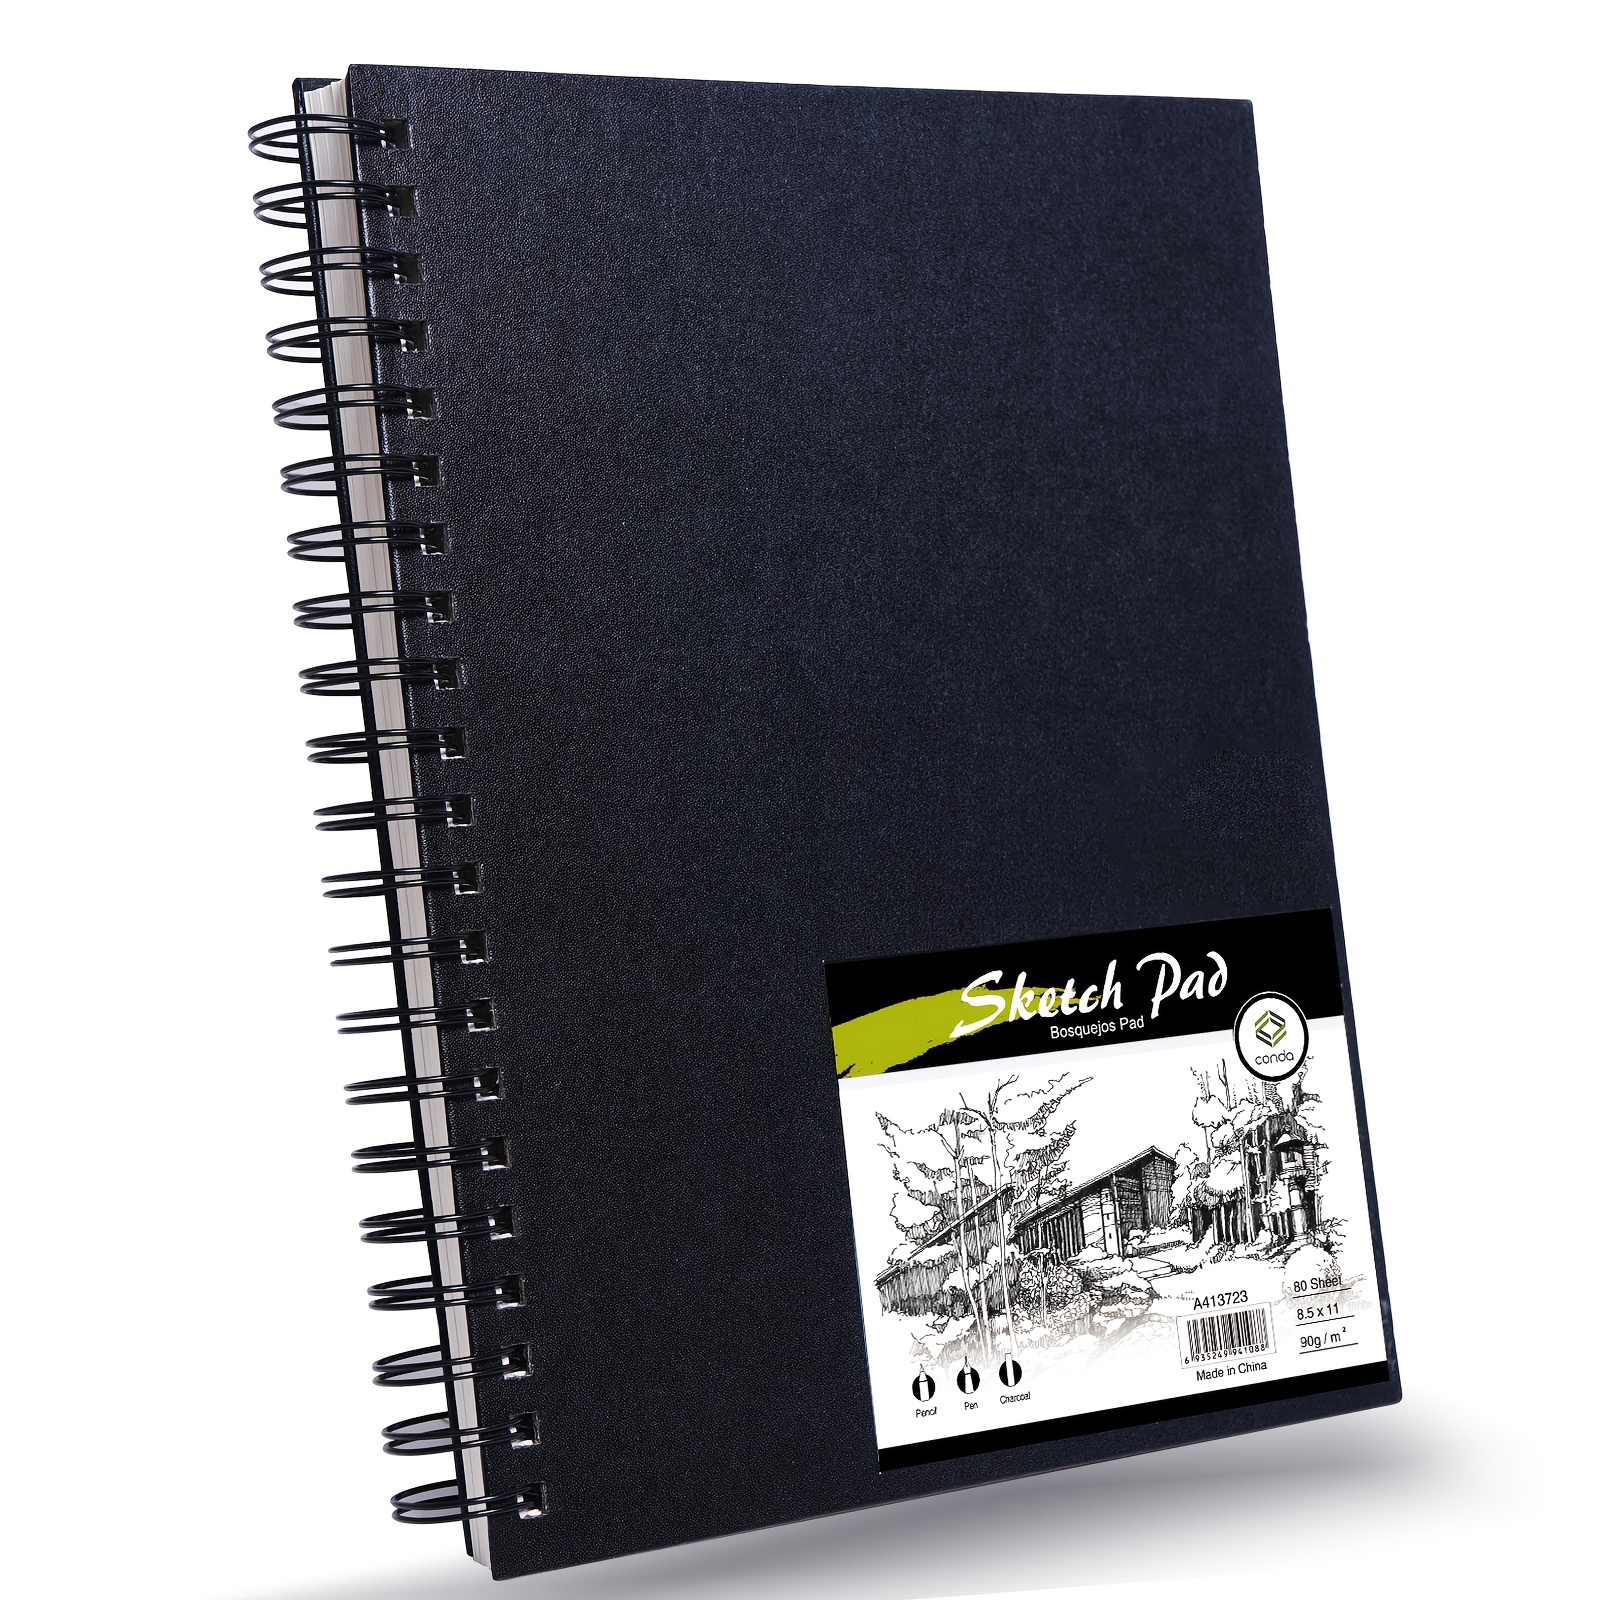 1pc Sketch Book, 5.5 x 8.5 Inches Sketchbook, 100 Sheets Top Spiral Sketch  Pad, (68 lb/100gsm) Acid-Free Drawing Paper Pad, Art Supplies for Colored  and Graphite Pencils, Charcoal, & Soft Pastel.